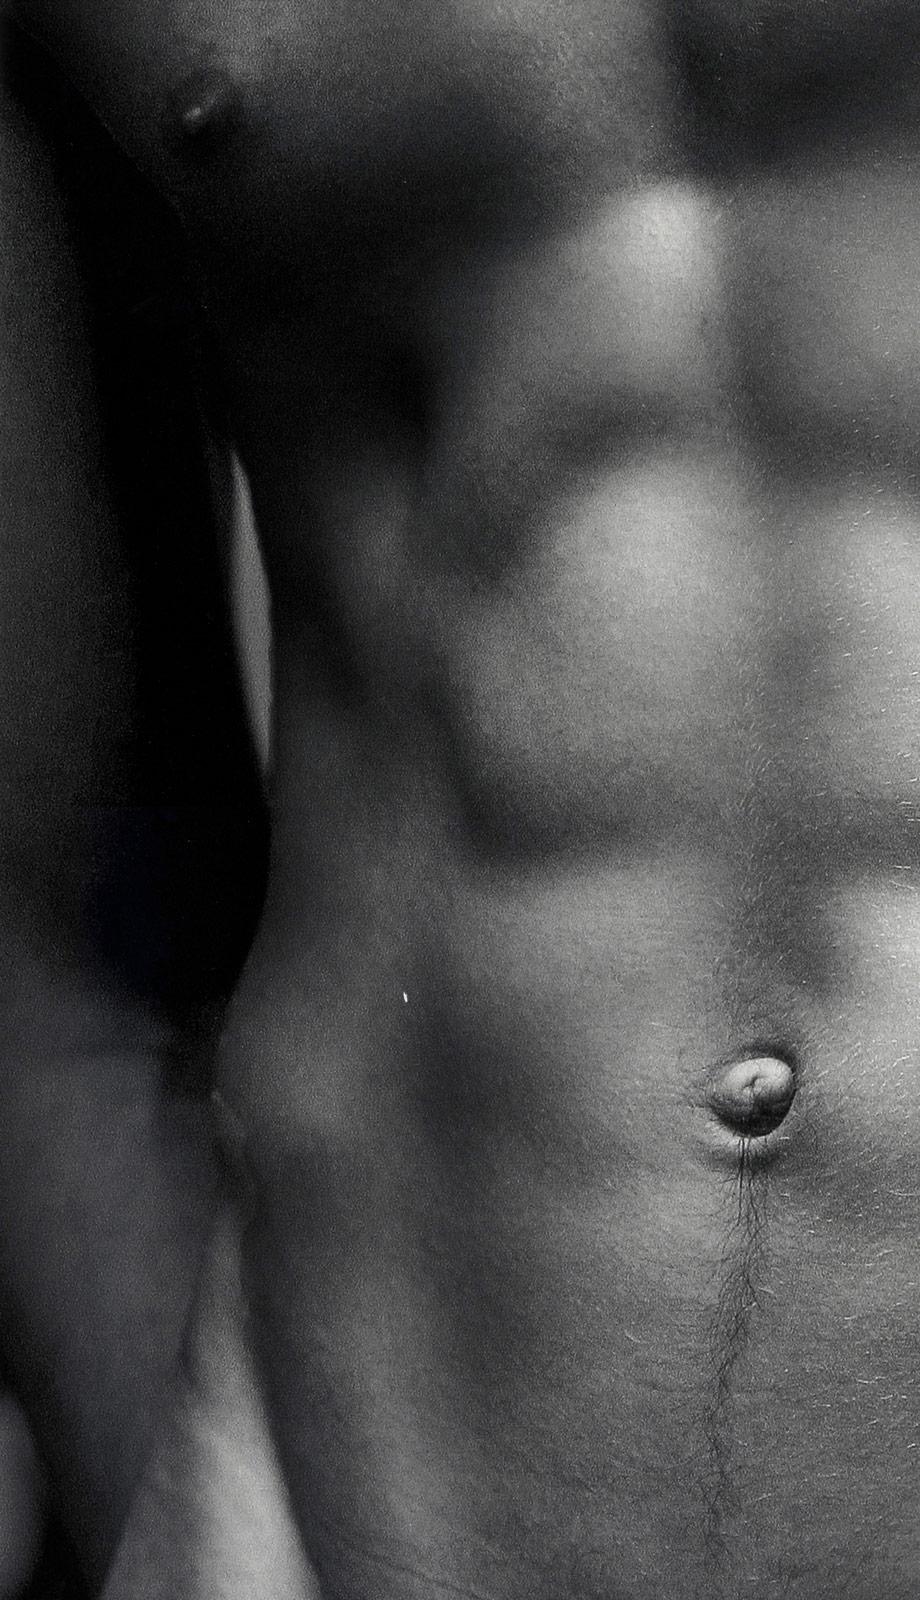 Mohamed (Magnificent sculpted abs of a young Czech maleI - Contemporary Photograph by Benno Thoma